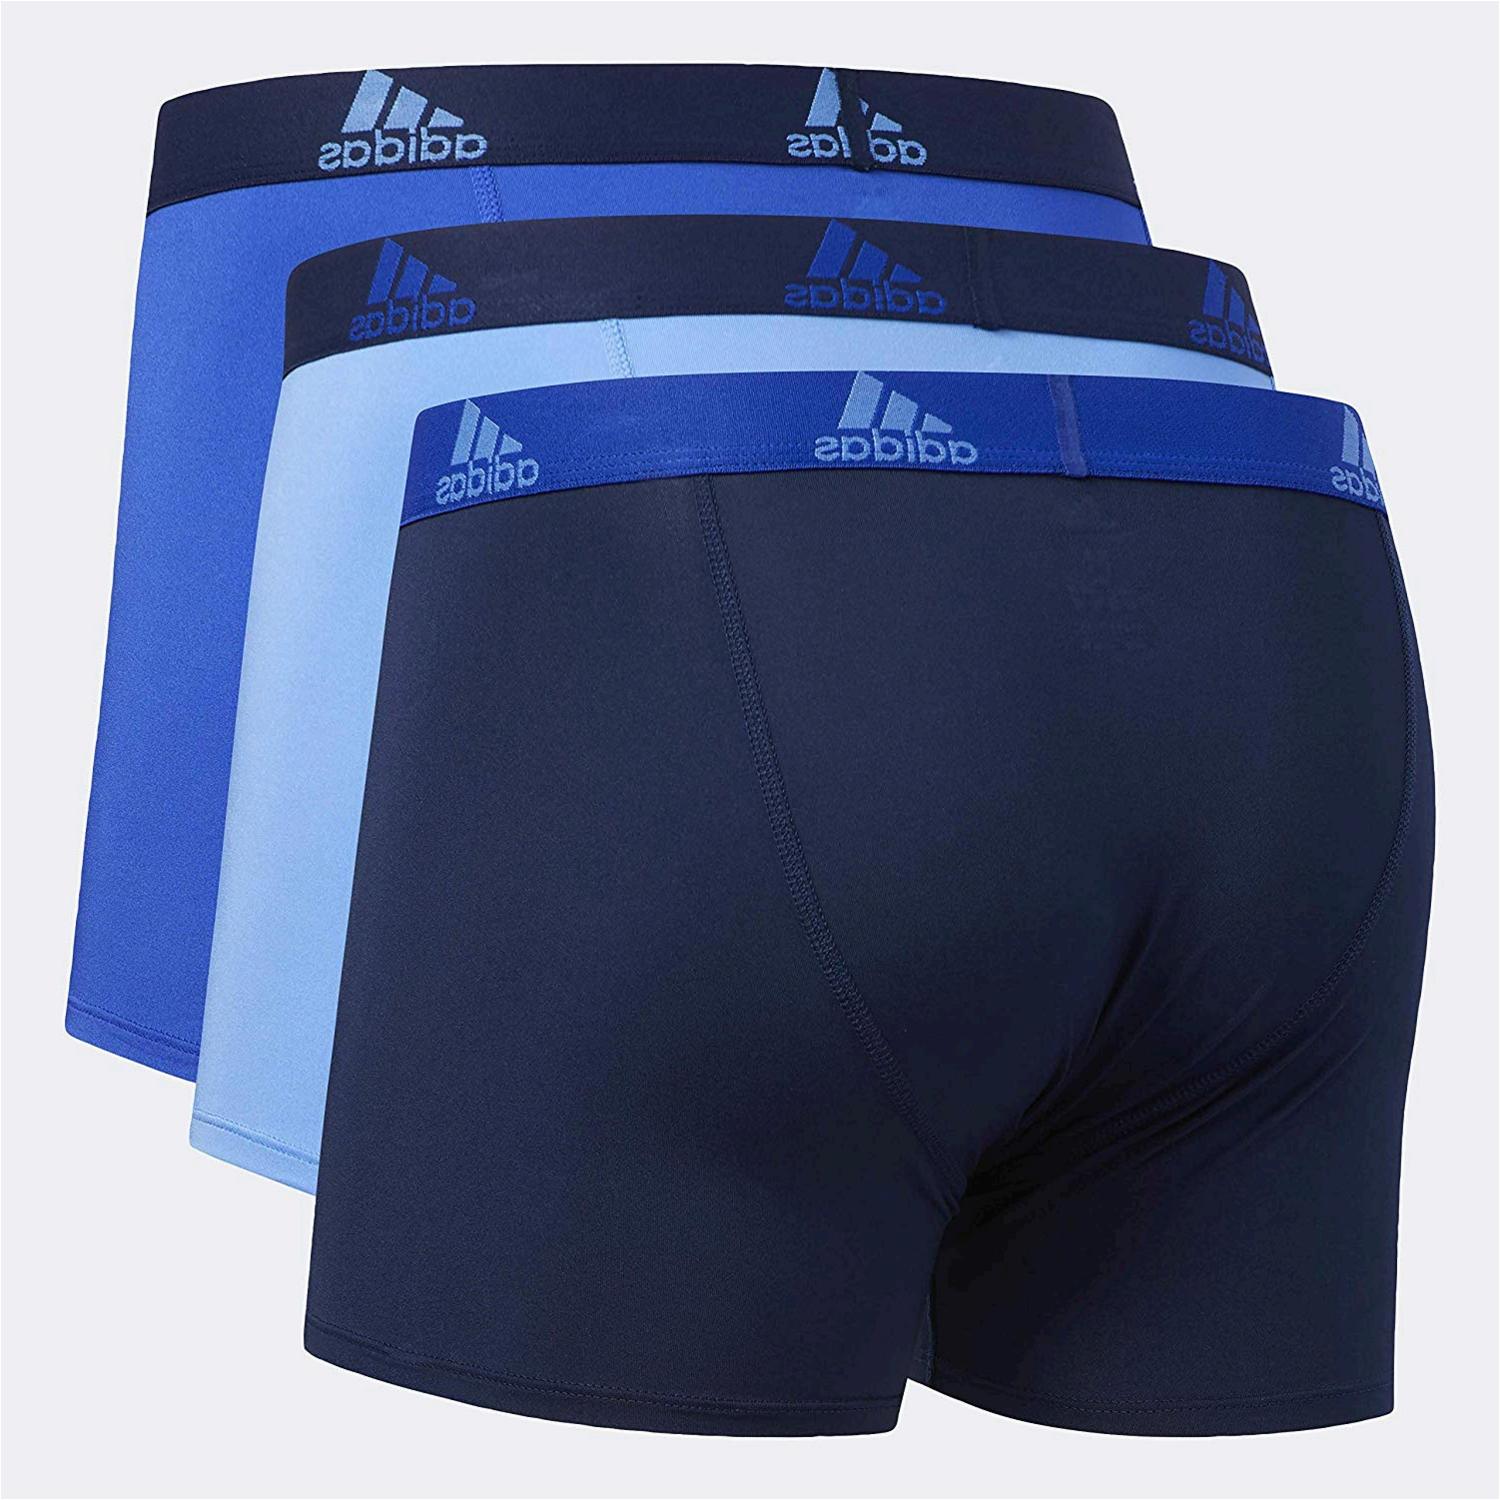 adidas Men's Performance Trunks Underwear (3-Pack), Real, Blue, Size